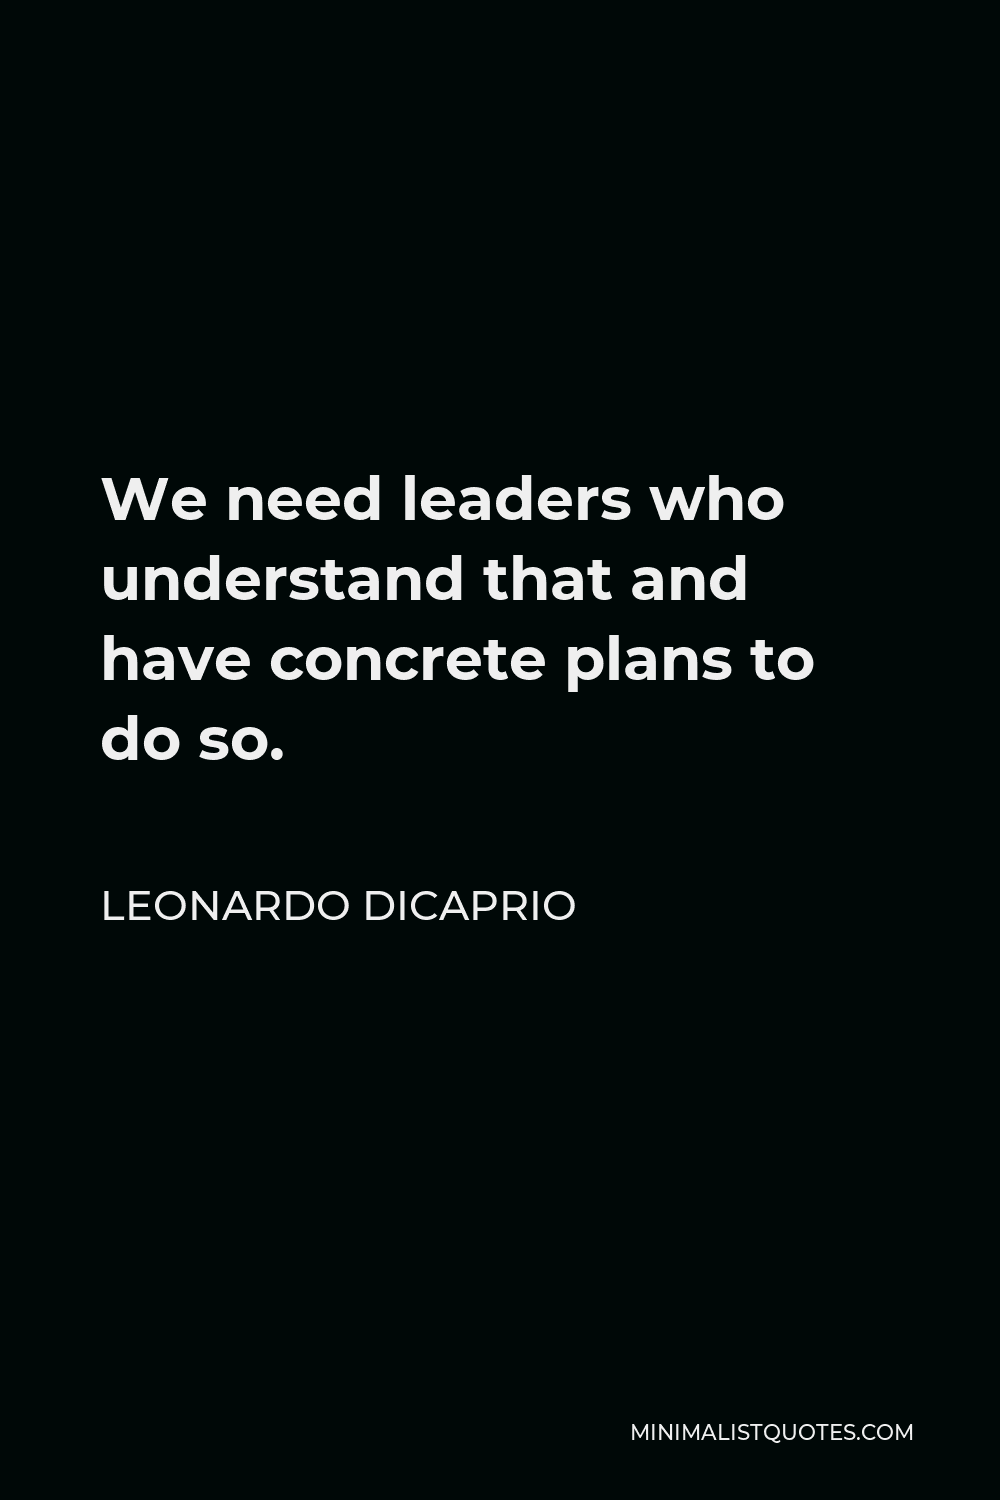 Leonardo DiCaprio Quote - We need leaders who understand that and have concrete plans to do so.